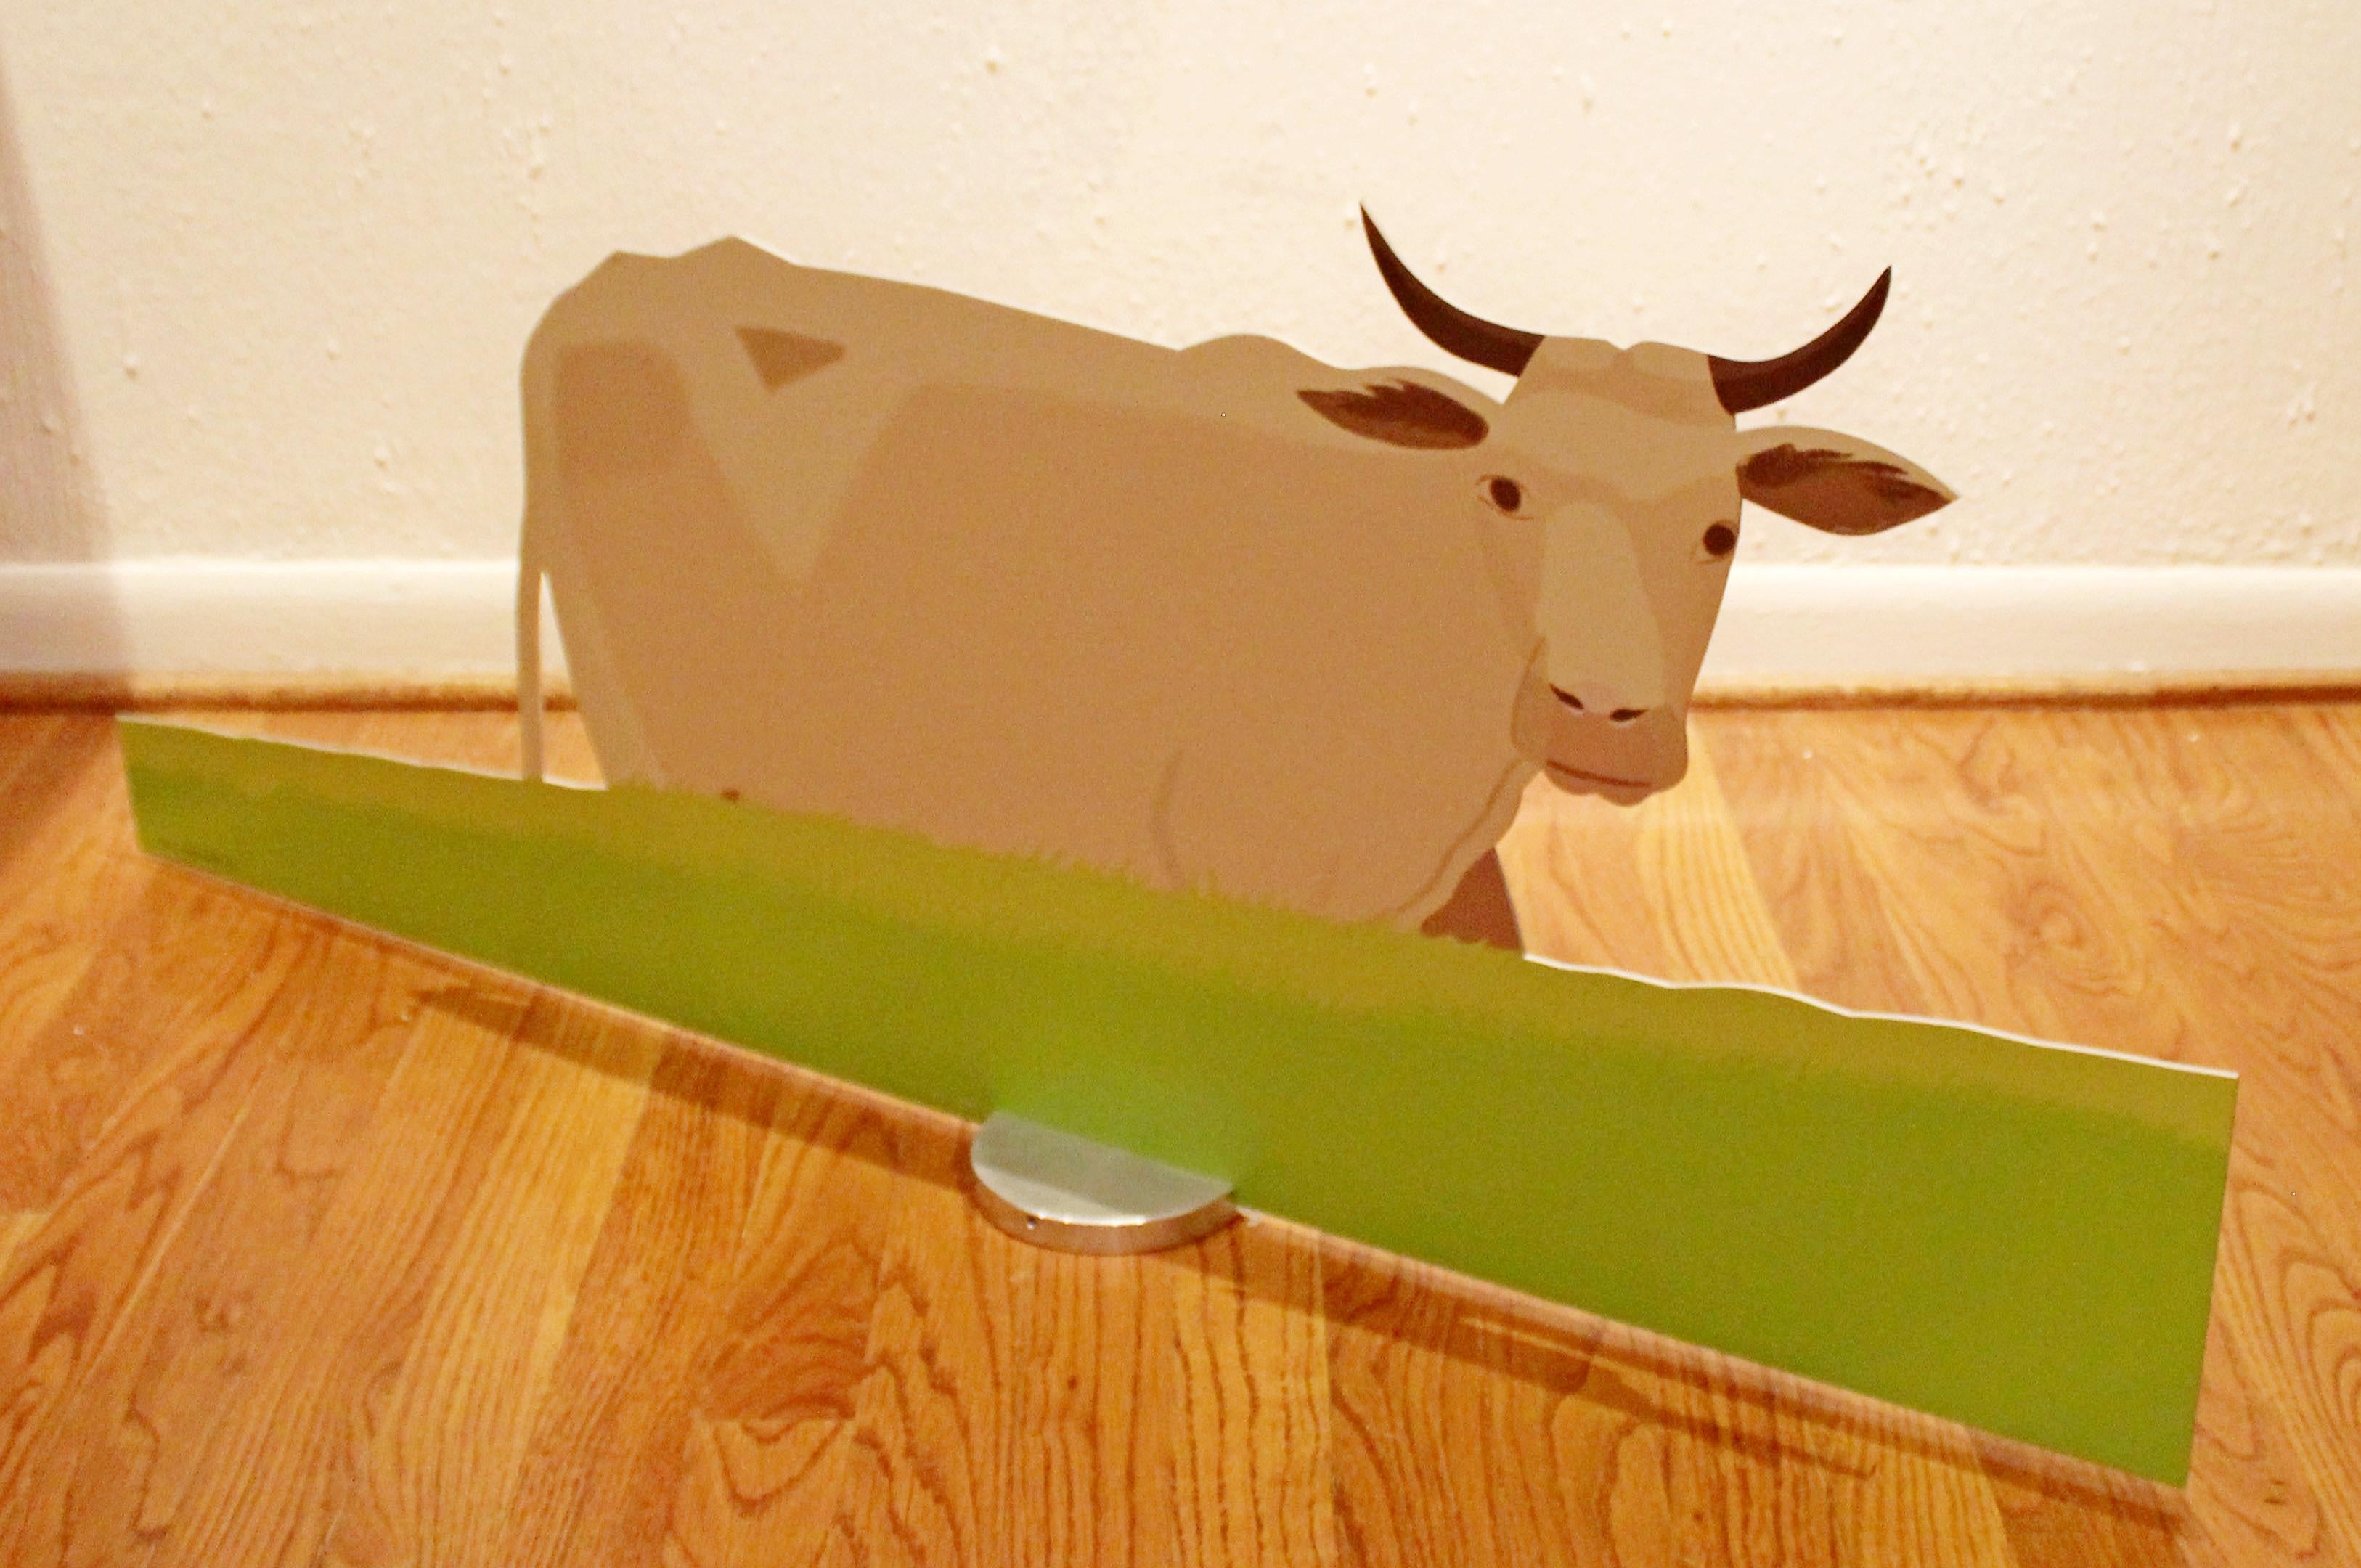 Spanish Contemporary 2D Metal Cow Table Sculpture A.P. Signed Numbered by Alex Katz 1/15